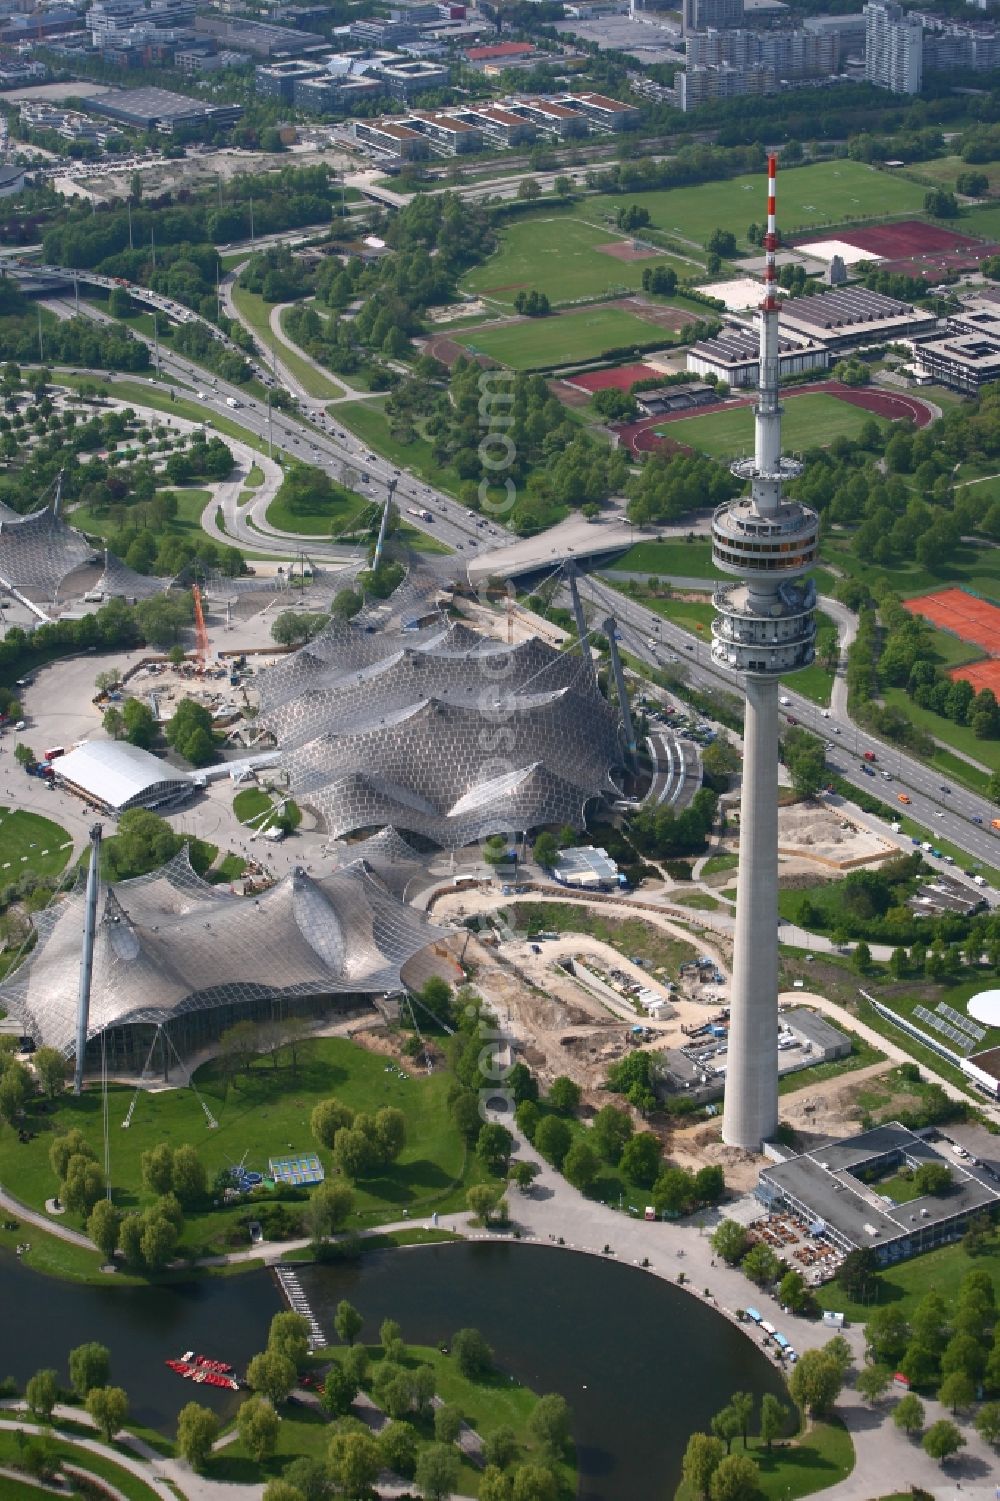 München from above - The Olympic Hall, Olympic Tower and the Olympic lake are the key elements of the central sports facility Olympic Park and were the main locations in the 1972 Summer Olympics in Munich in Bavaria. The group of architects designed the modern Olympic Park Sports and event facilities as part of landscaping within the meaning of the concept of Olympic Games in the countryside. At the foot of the TV tower is the restaurant-Olympiasee. In the background the central sports facilities at the Technical University of Munich can be seen